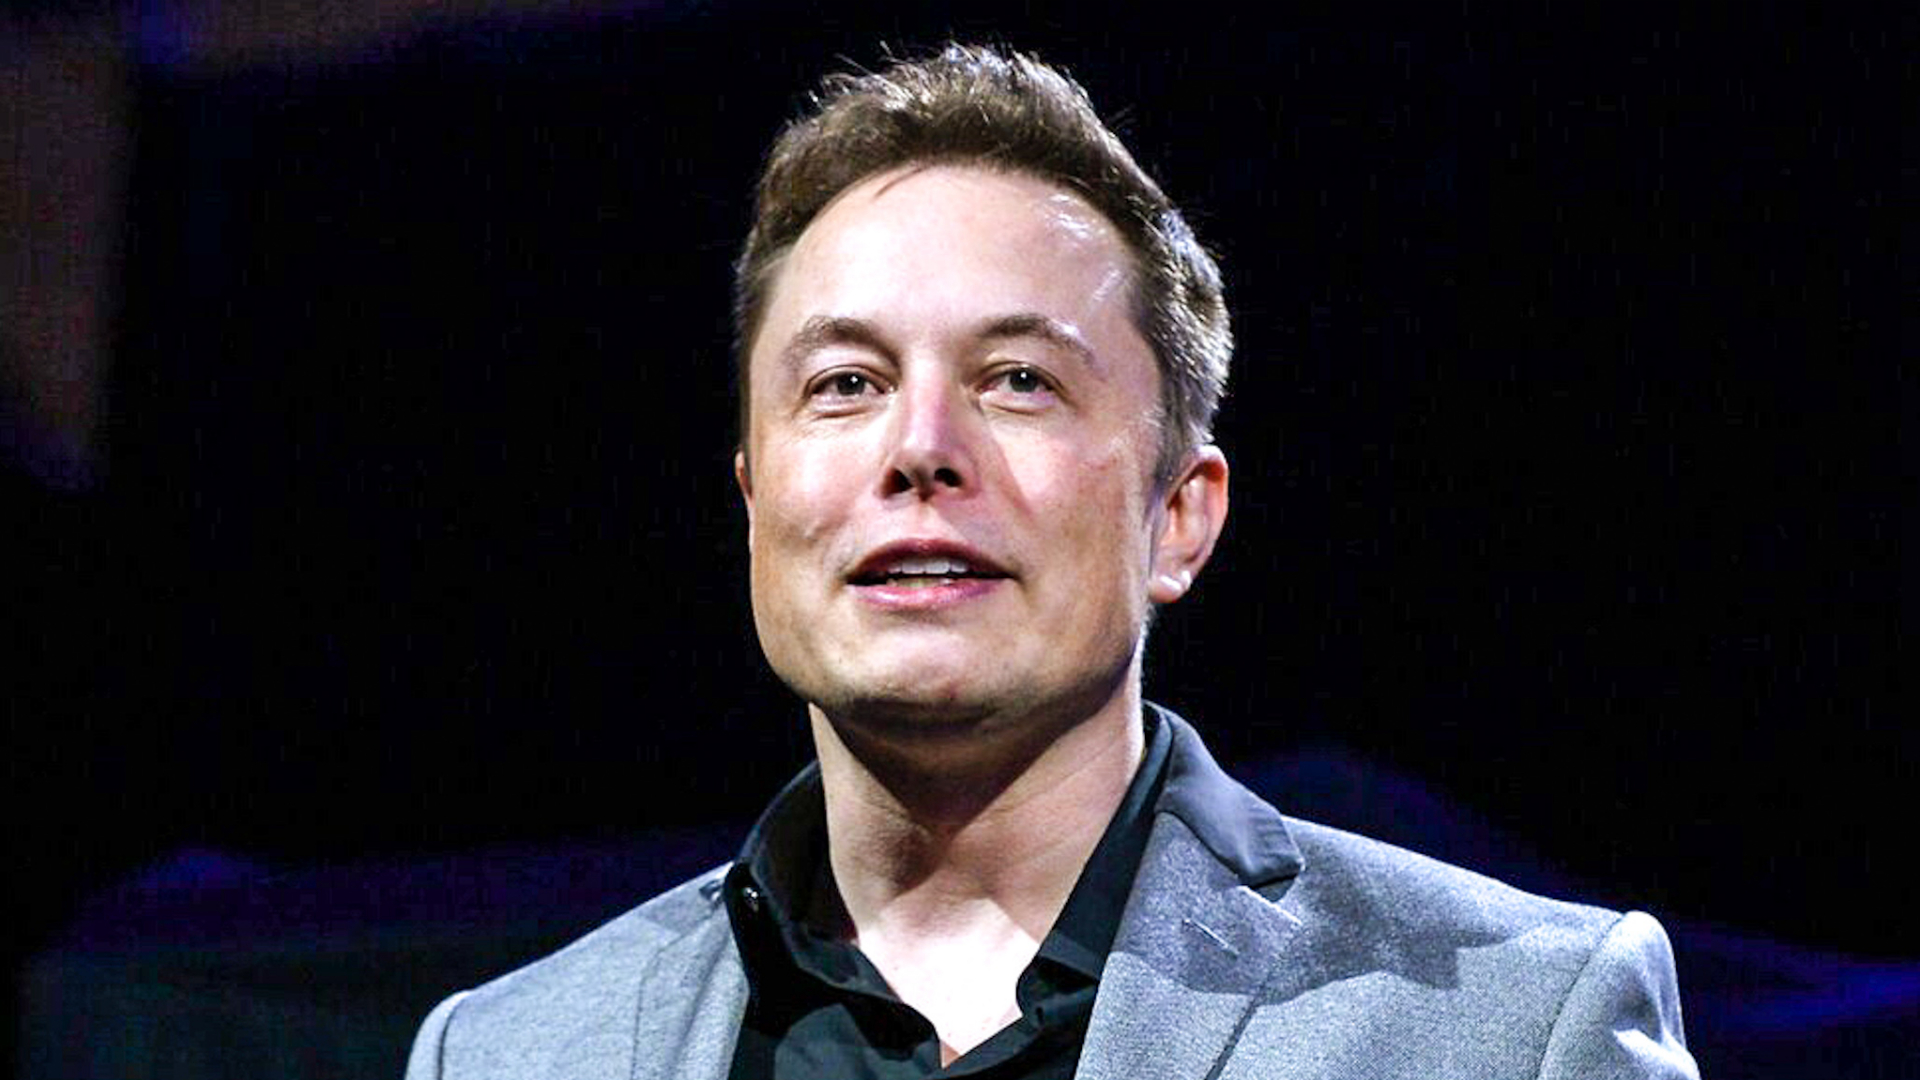 Elon Musk cheers woke journalist migration from Twitter: ‘Judgy hall monitors stay on other platforms’